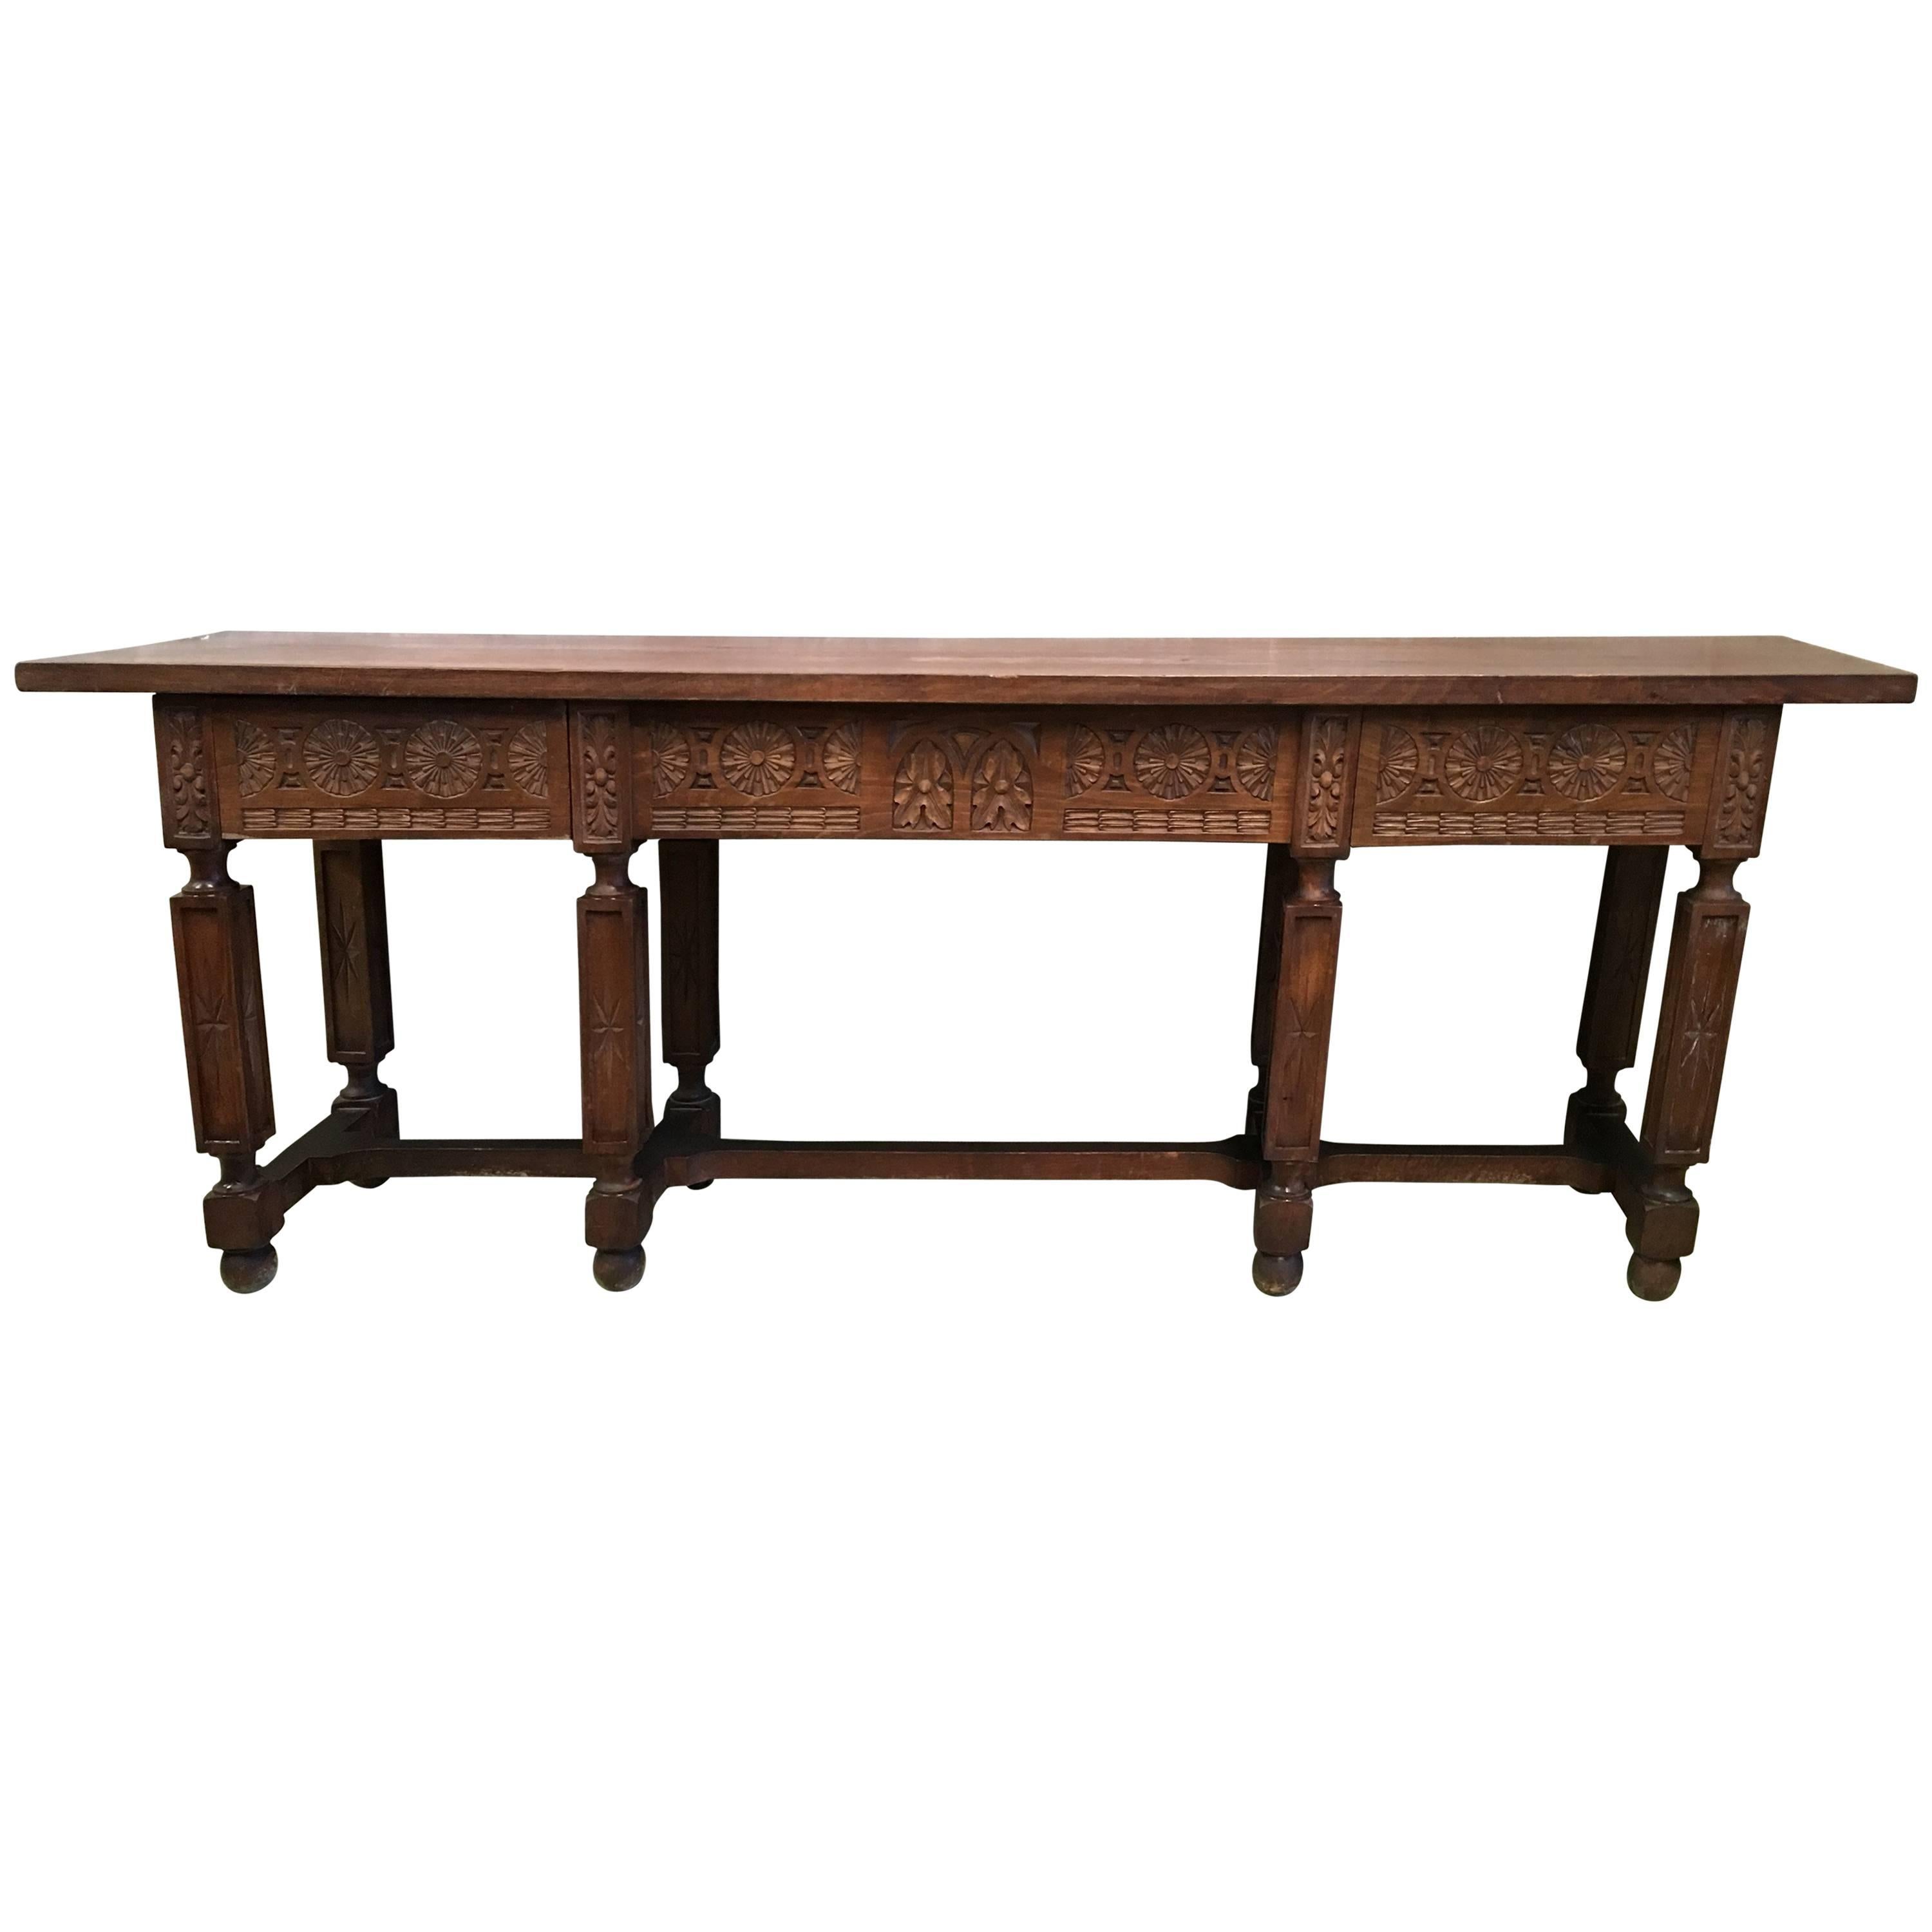 19th Century Spanish Carved Walnut Bench or Low Table with Two Drawers